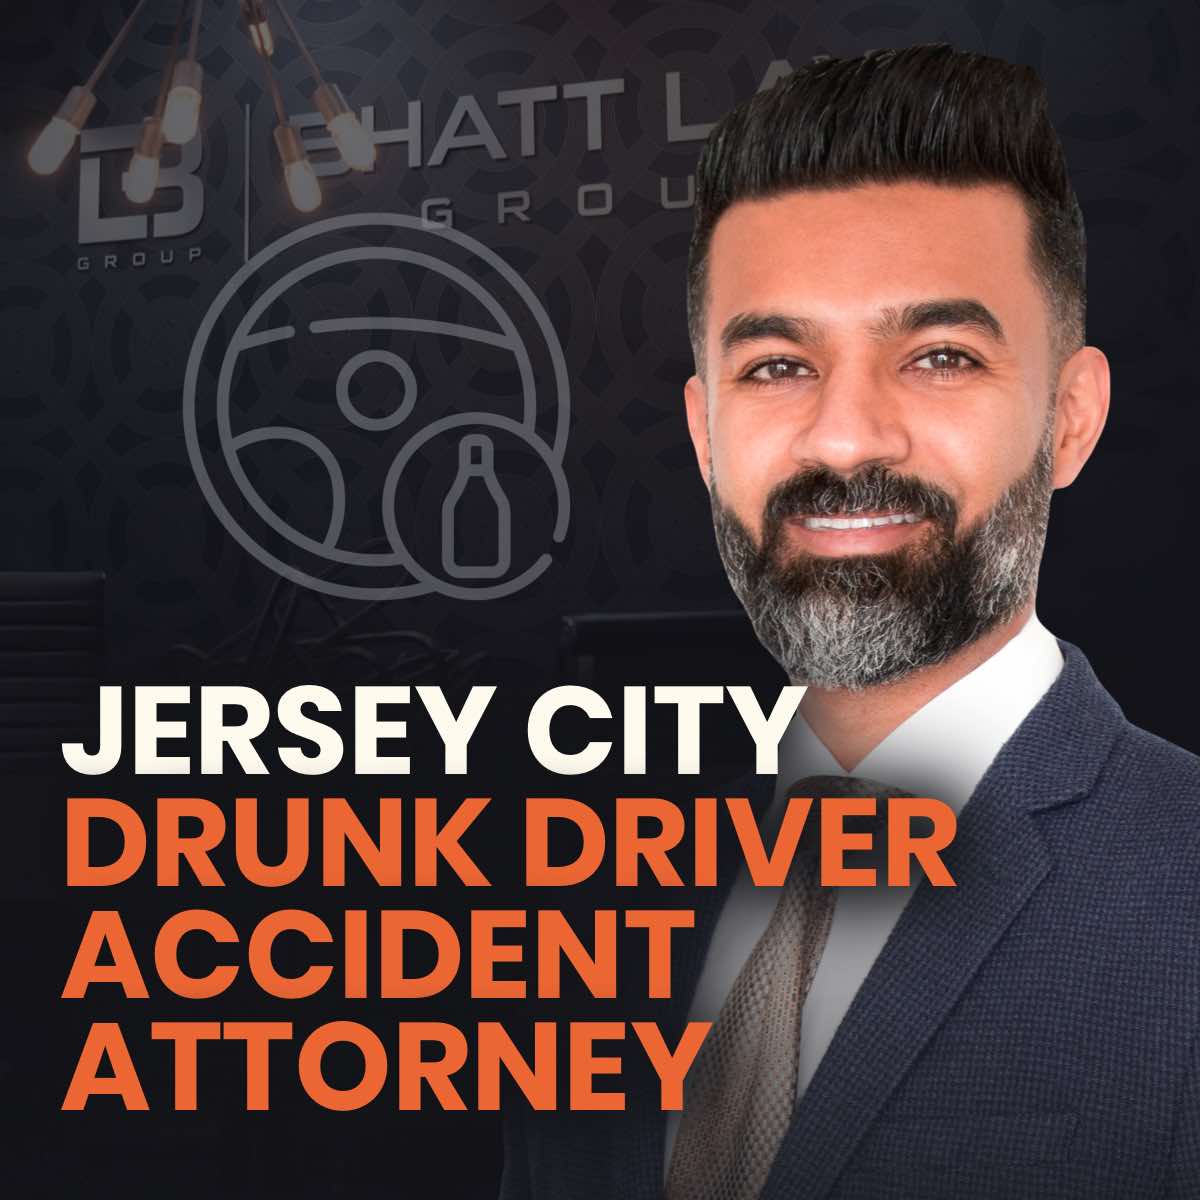 Jersey City Drunk Driver Accident Attorney